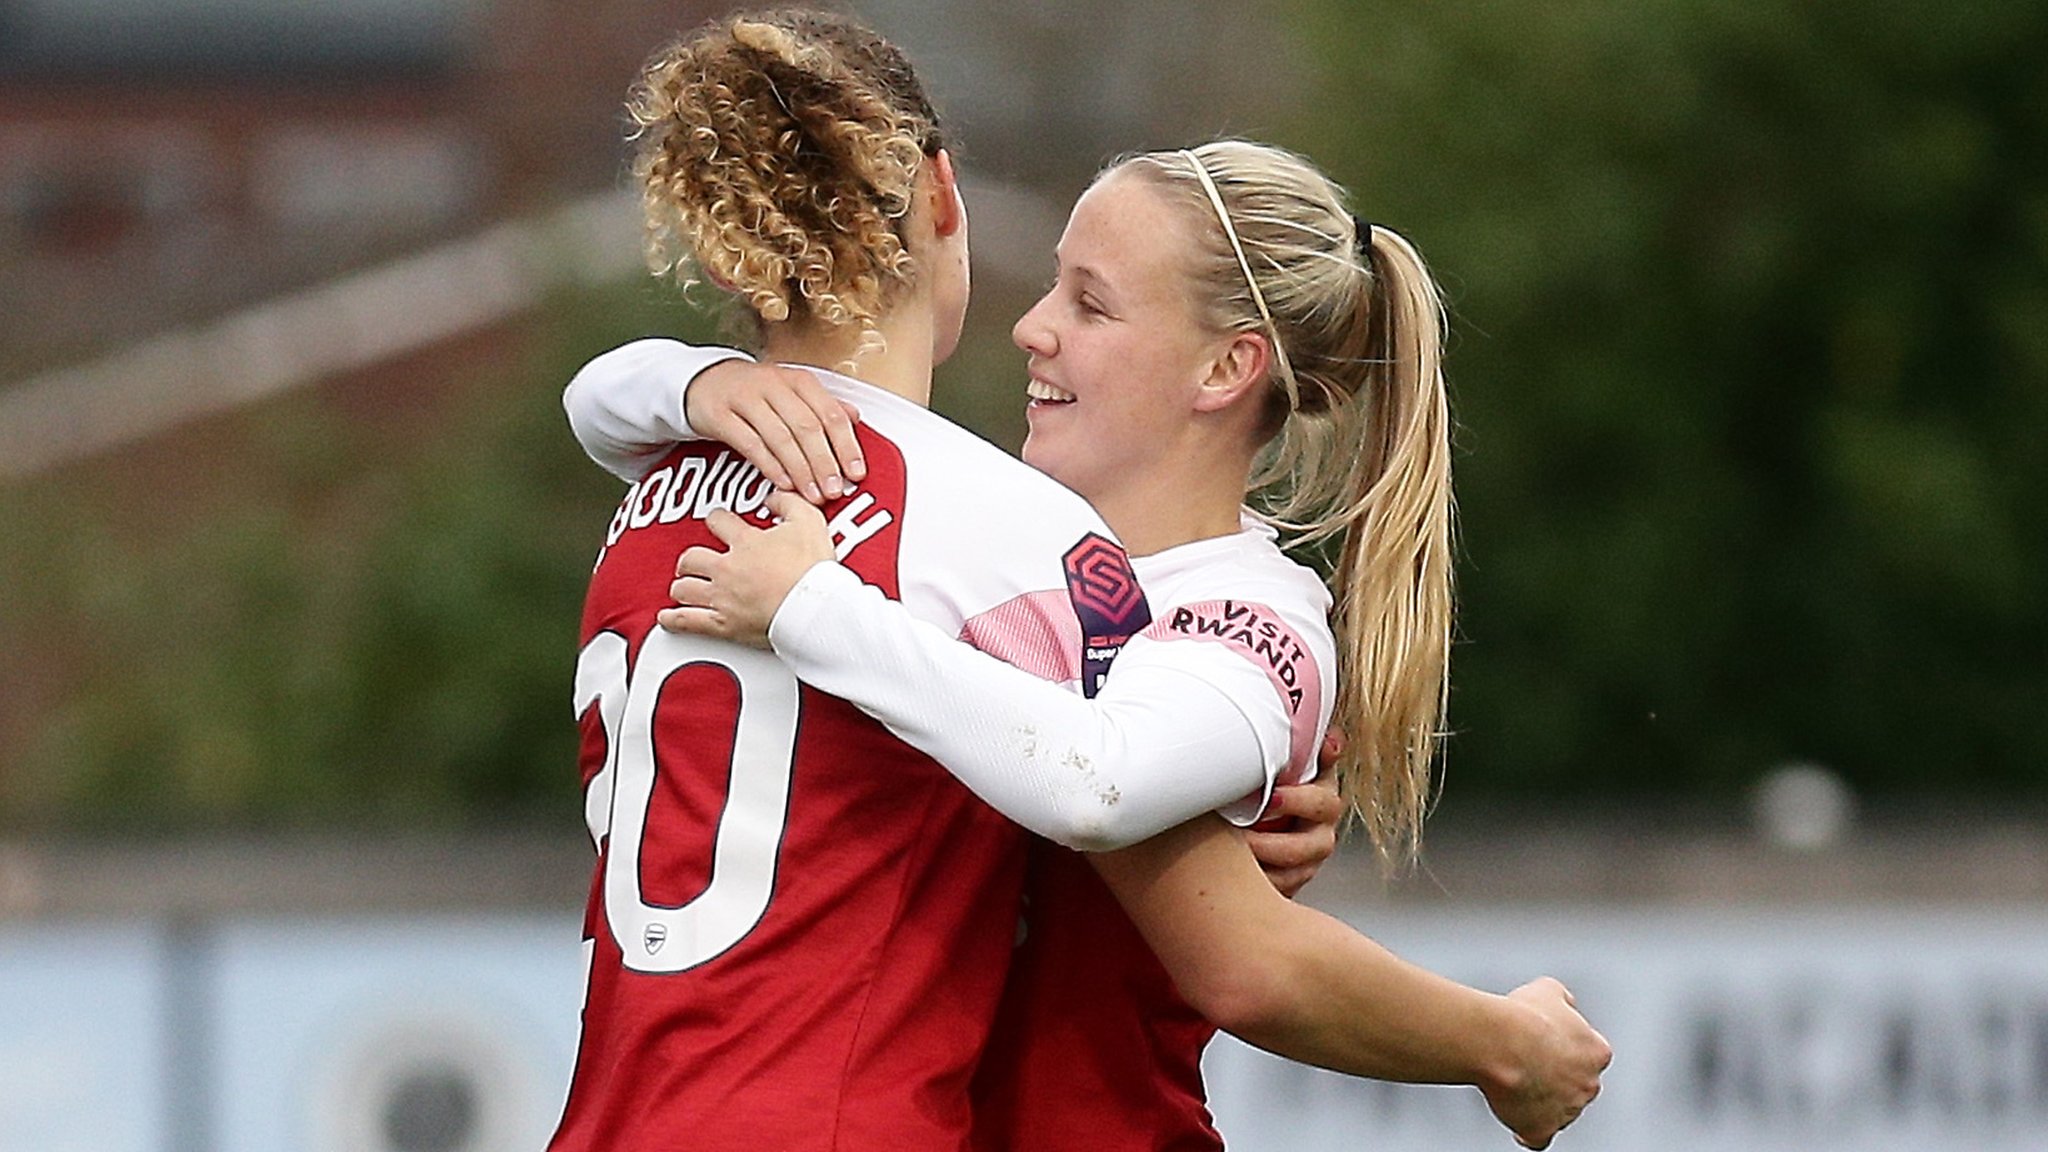 Arsenal Women 4-1 Brighton & Hove Albion Women: Gunners win ninth game in a row